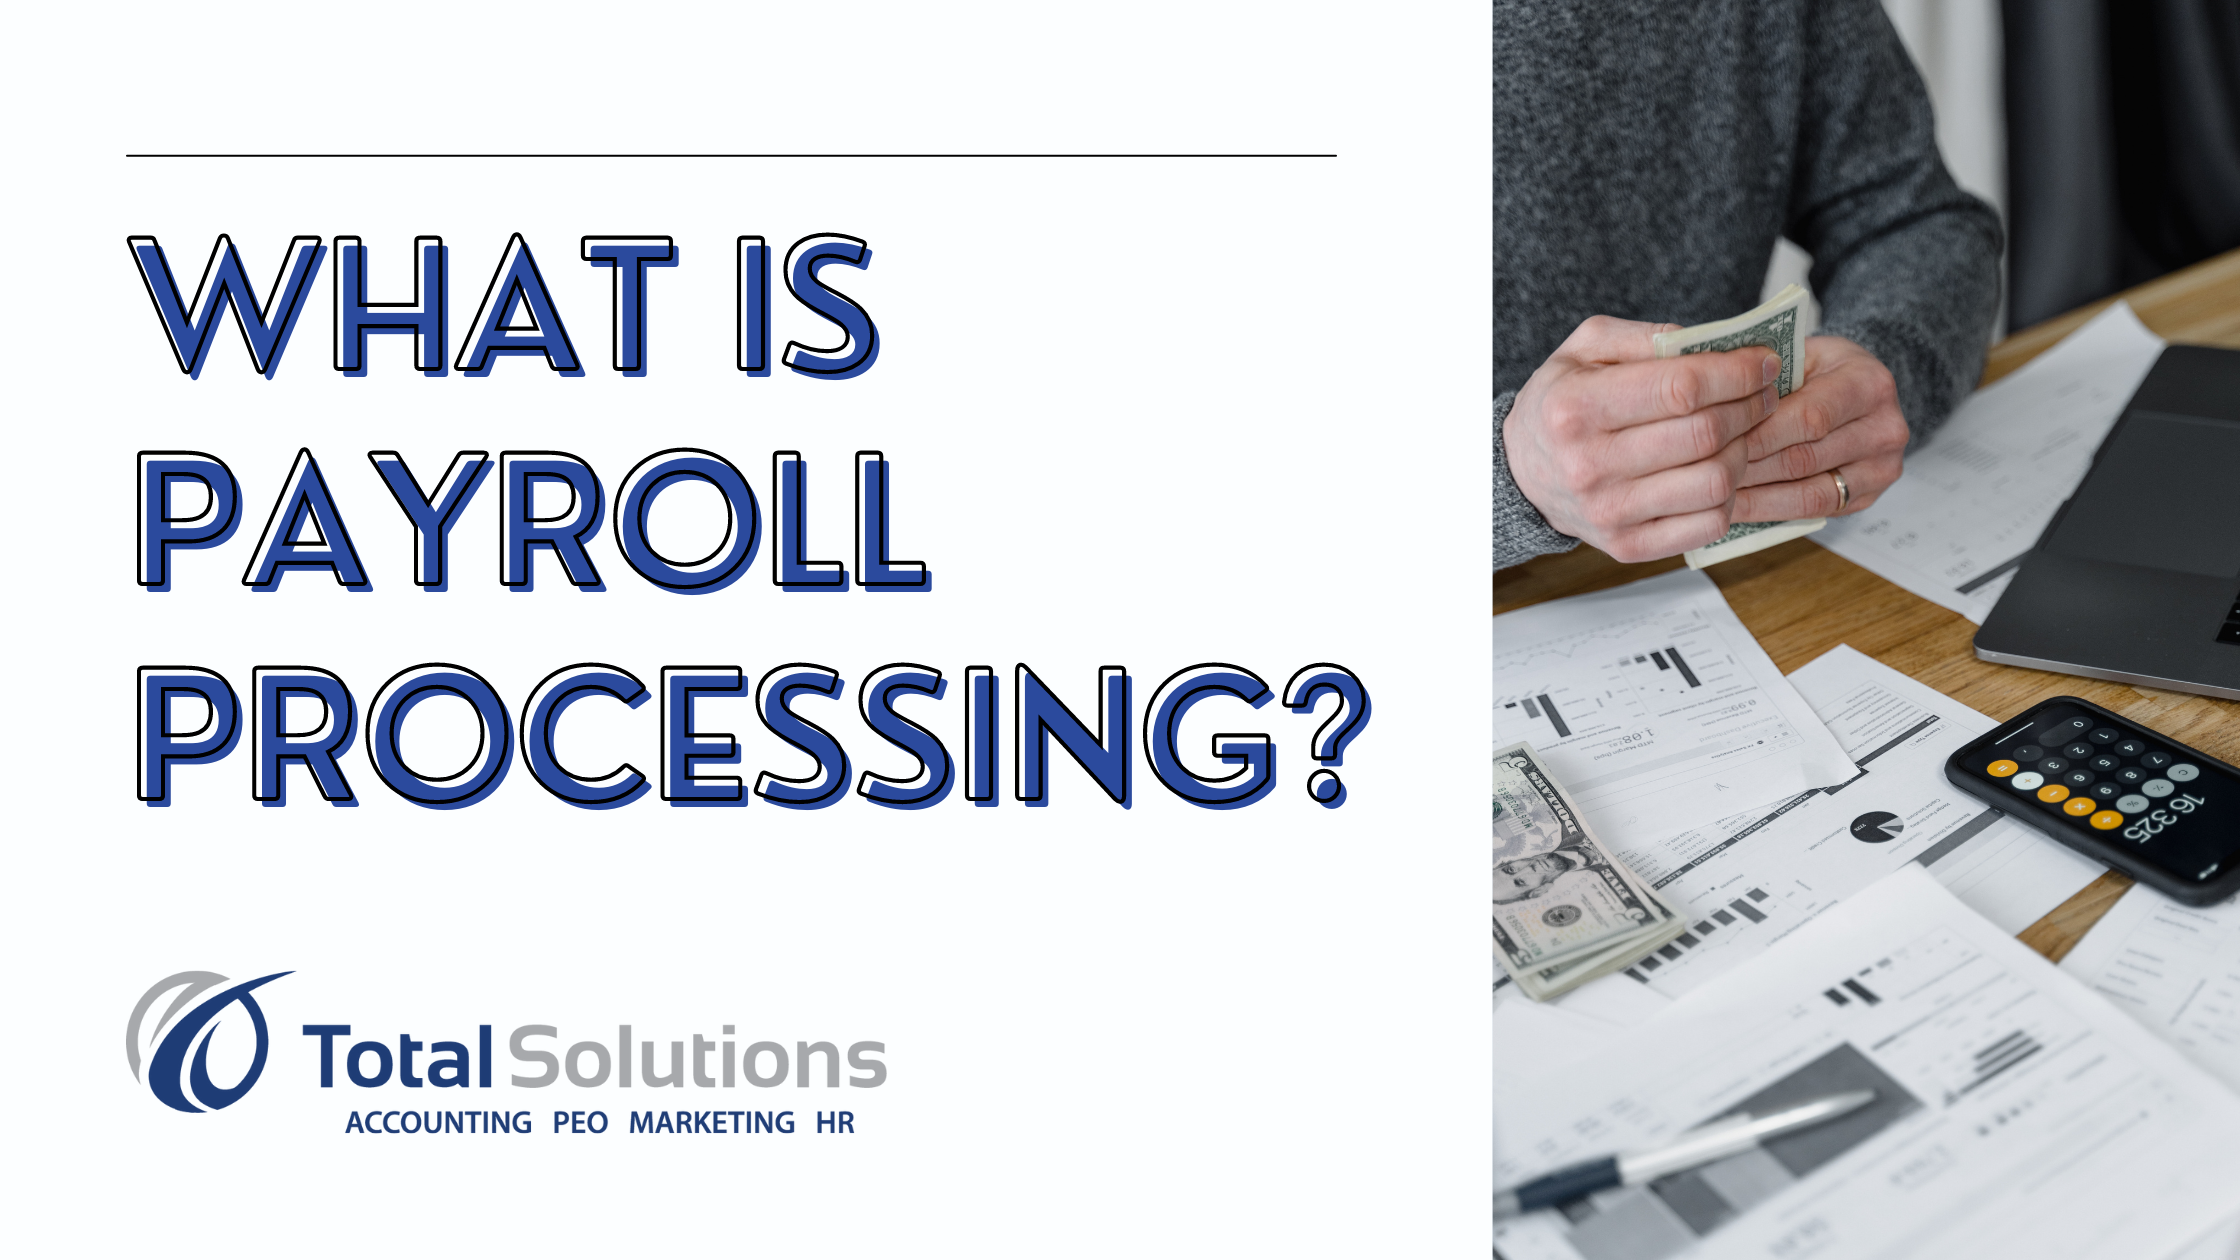 What is payroll processing?